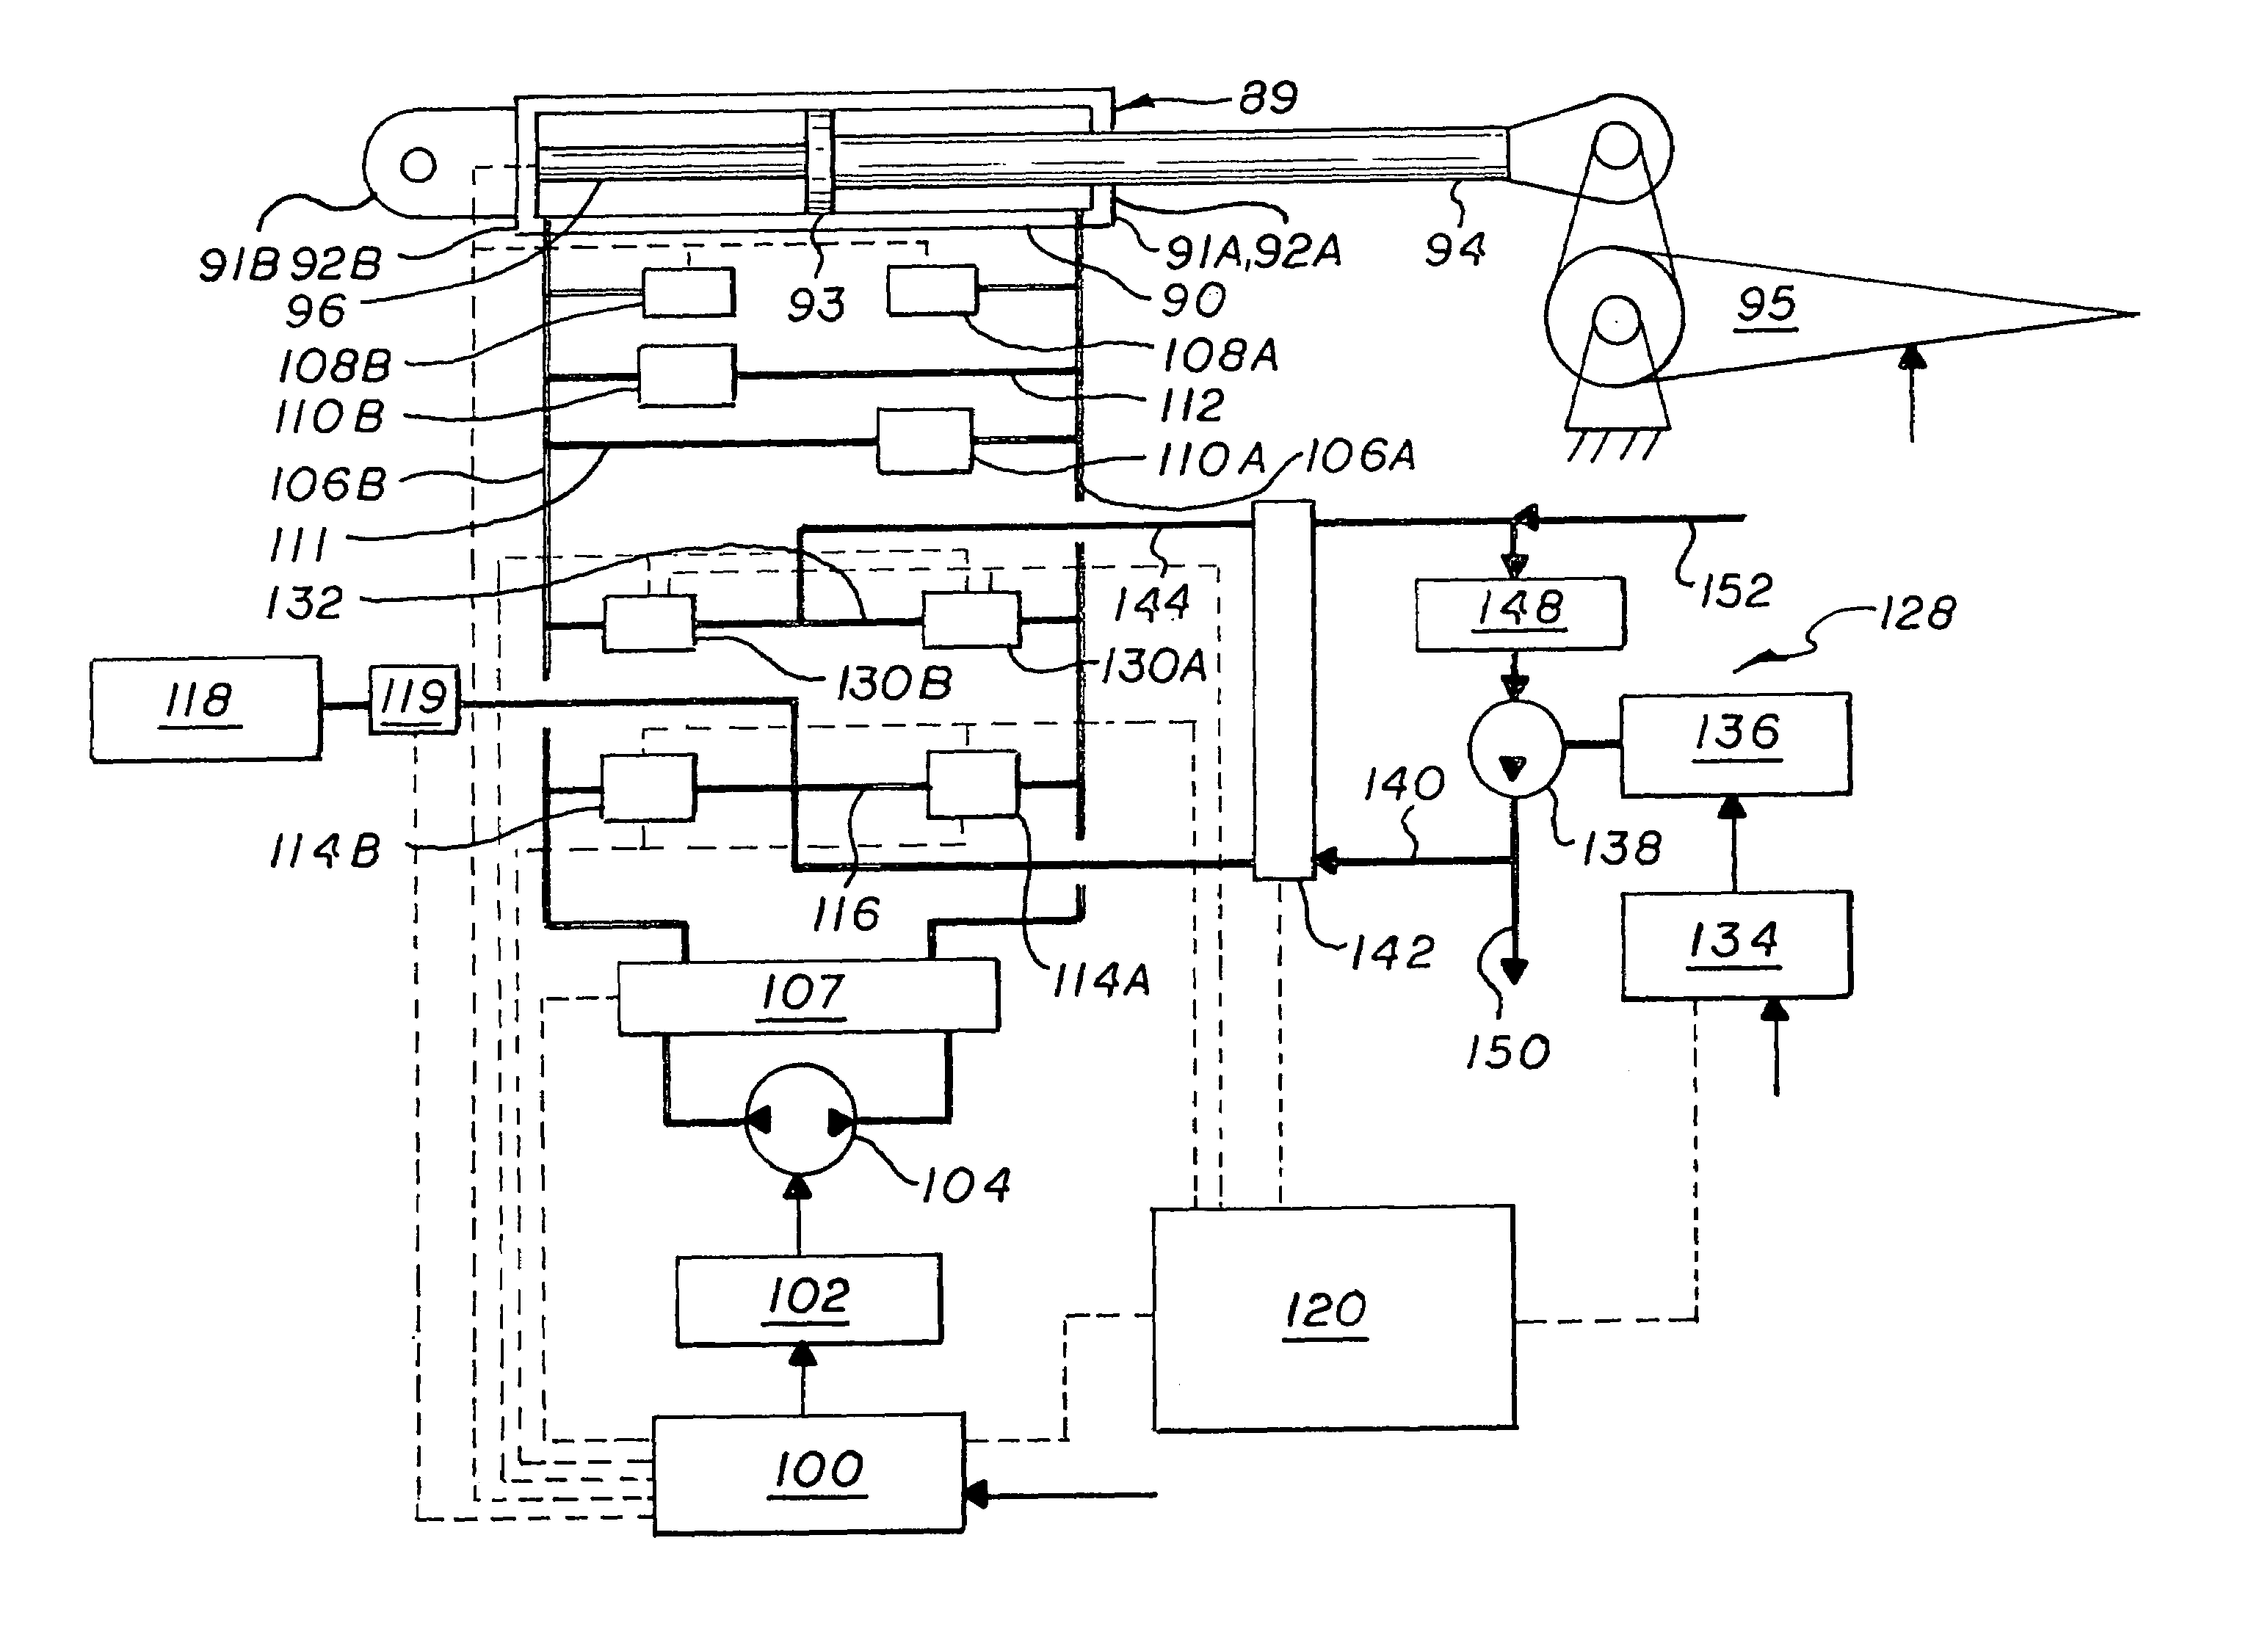 Electro-hydraulic actuator system